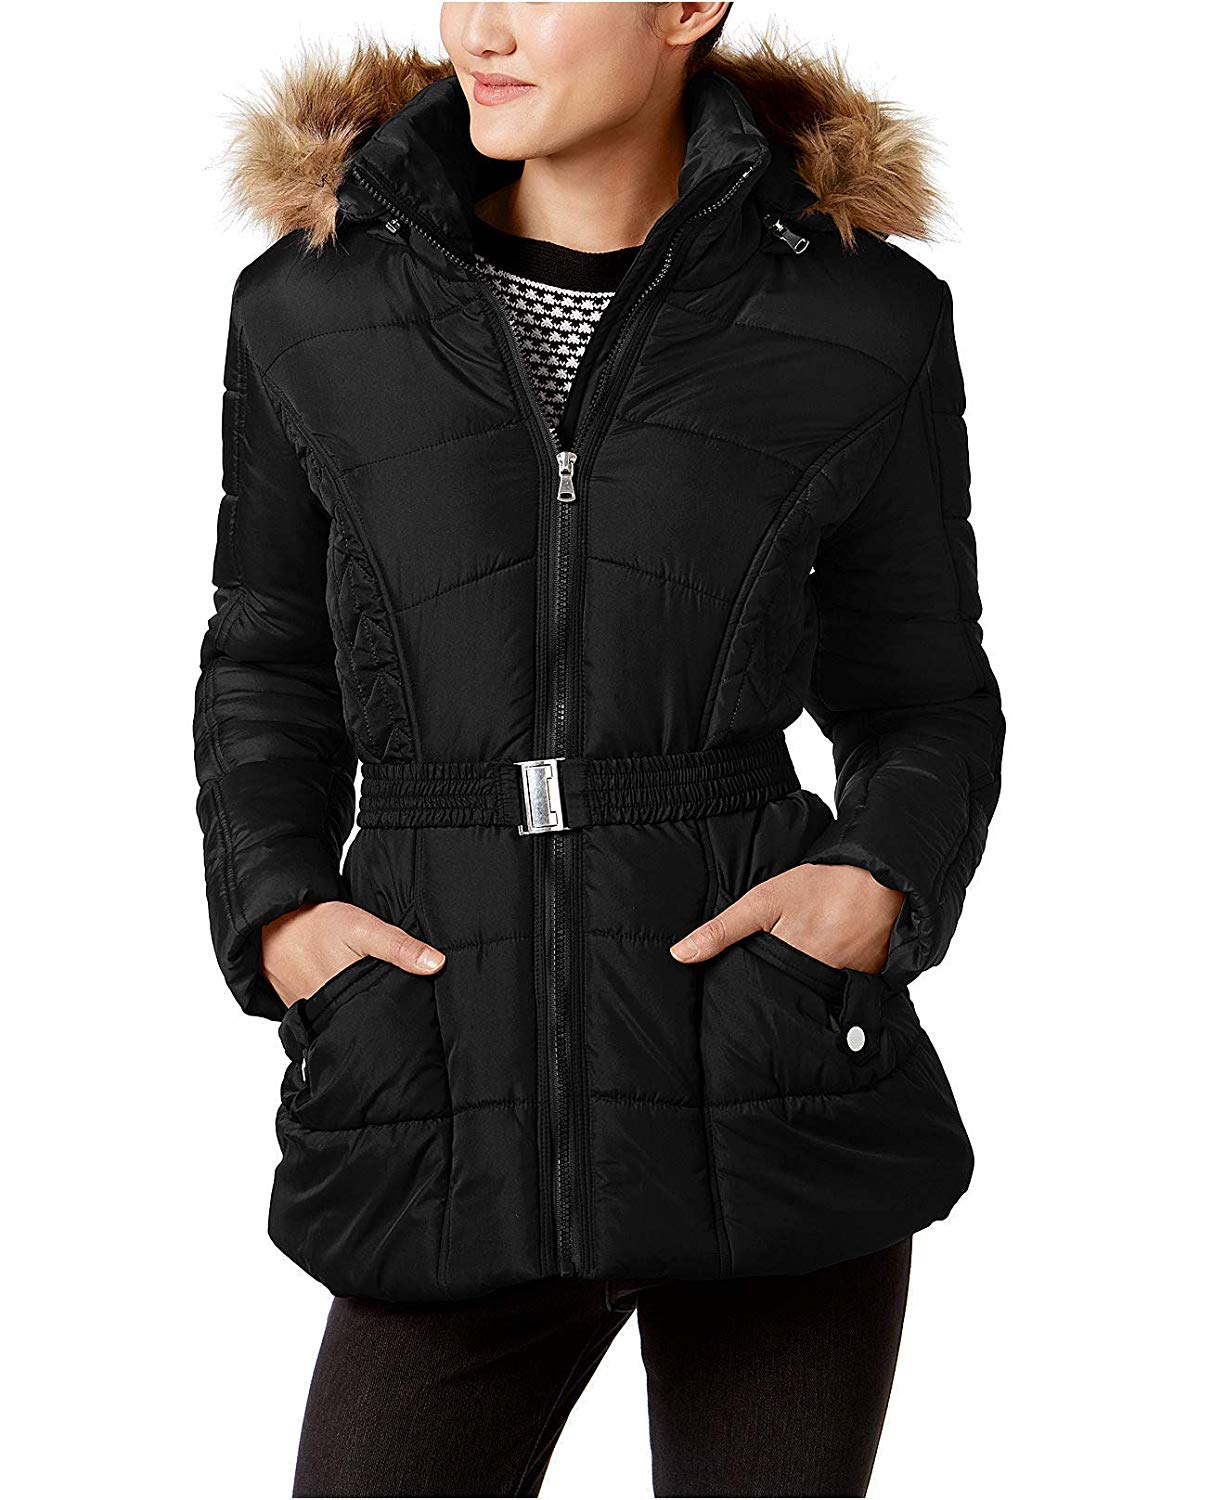 woocommerce-673321-2209615.cloudwaysapps.com-rampage-womens-black-belted-puffer-coat-jacket